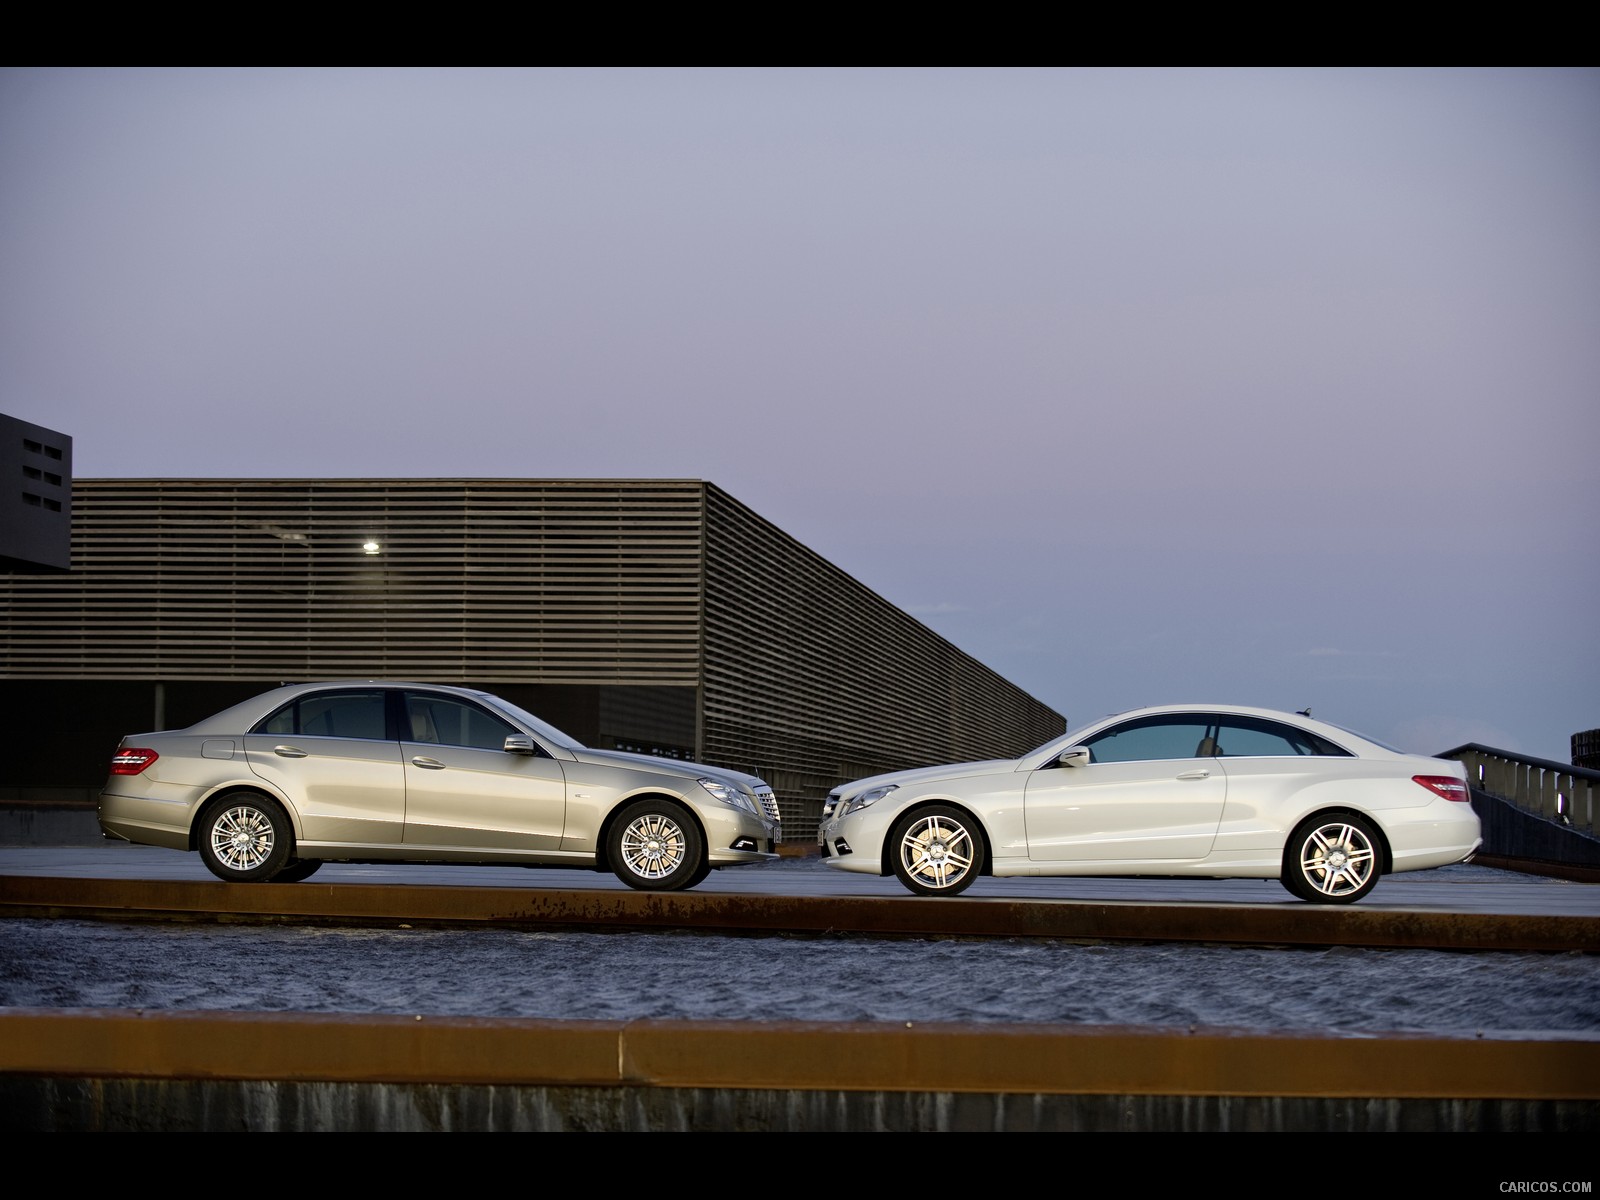 2010 Mercedes-Benz E-Class Coupe - Duo - Side View Photo, #63 of 213